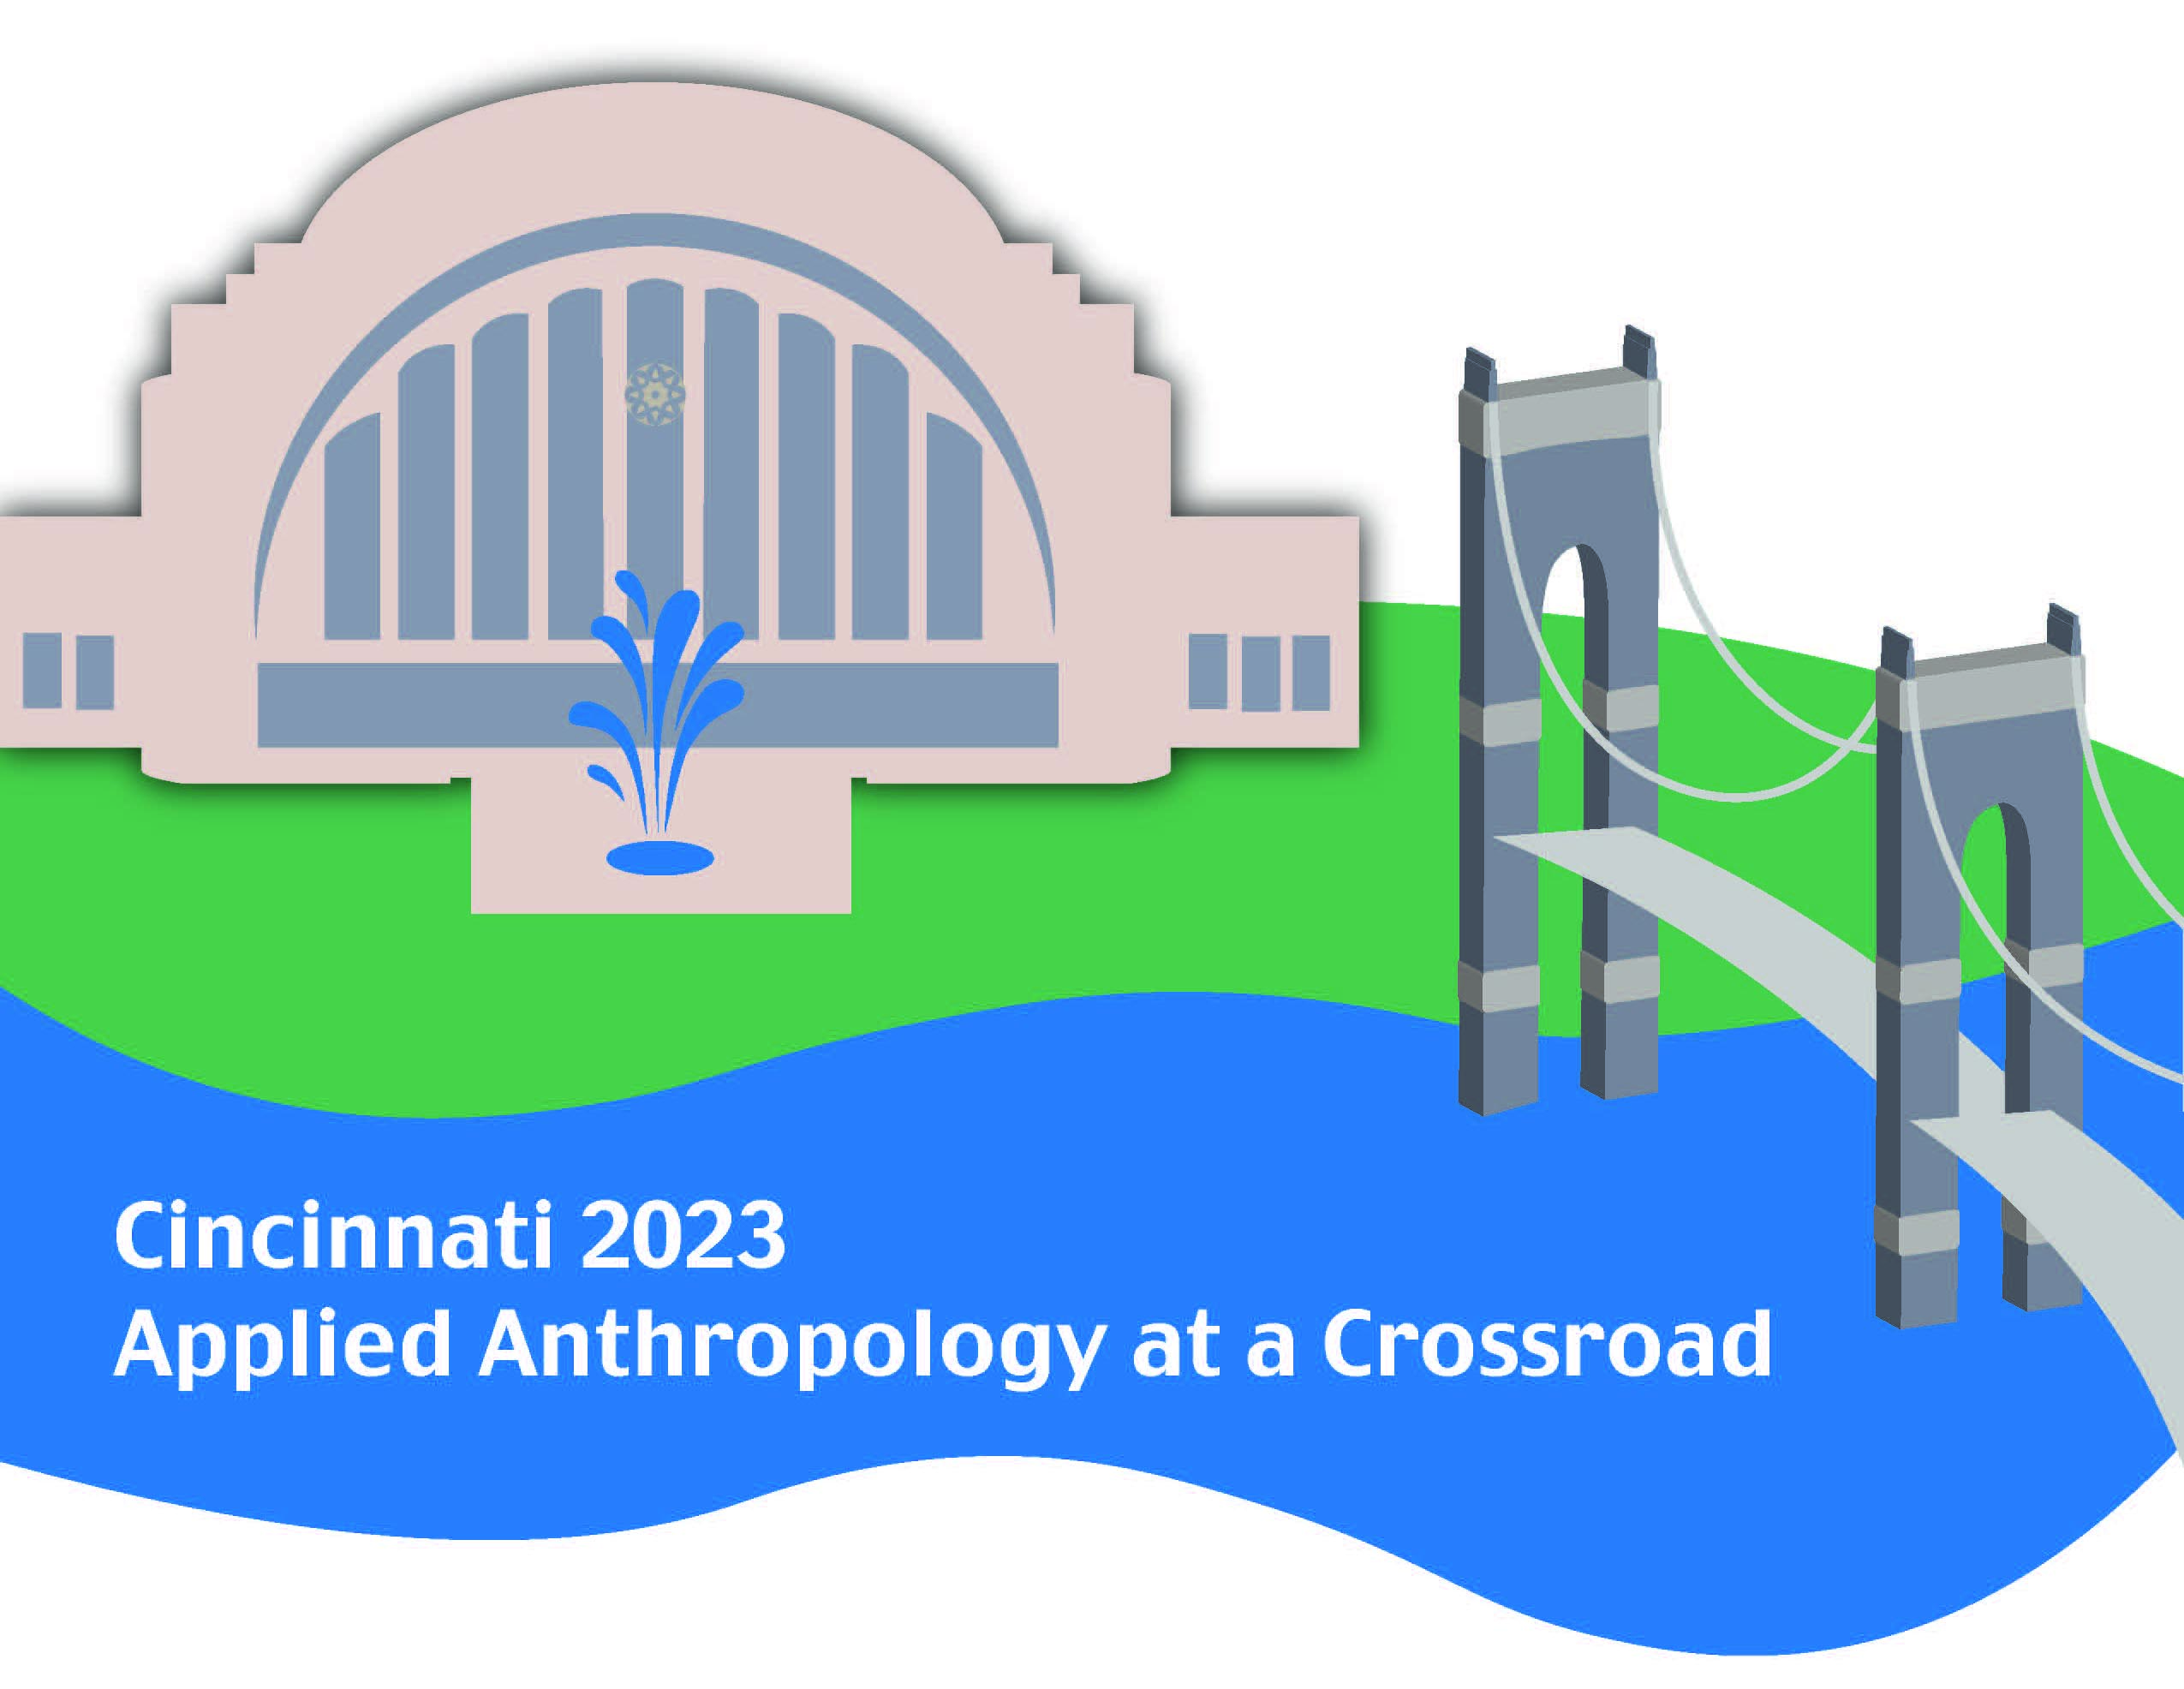 Society for Applied Anthropology Annual Meeting 2023 in Cincinnati, OH Applied Anthropology at a Crossroad